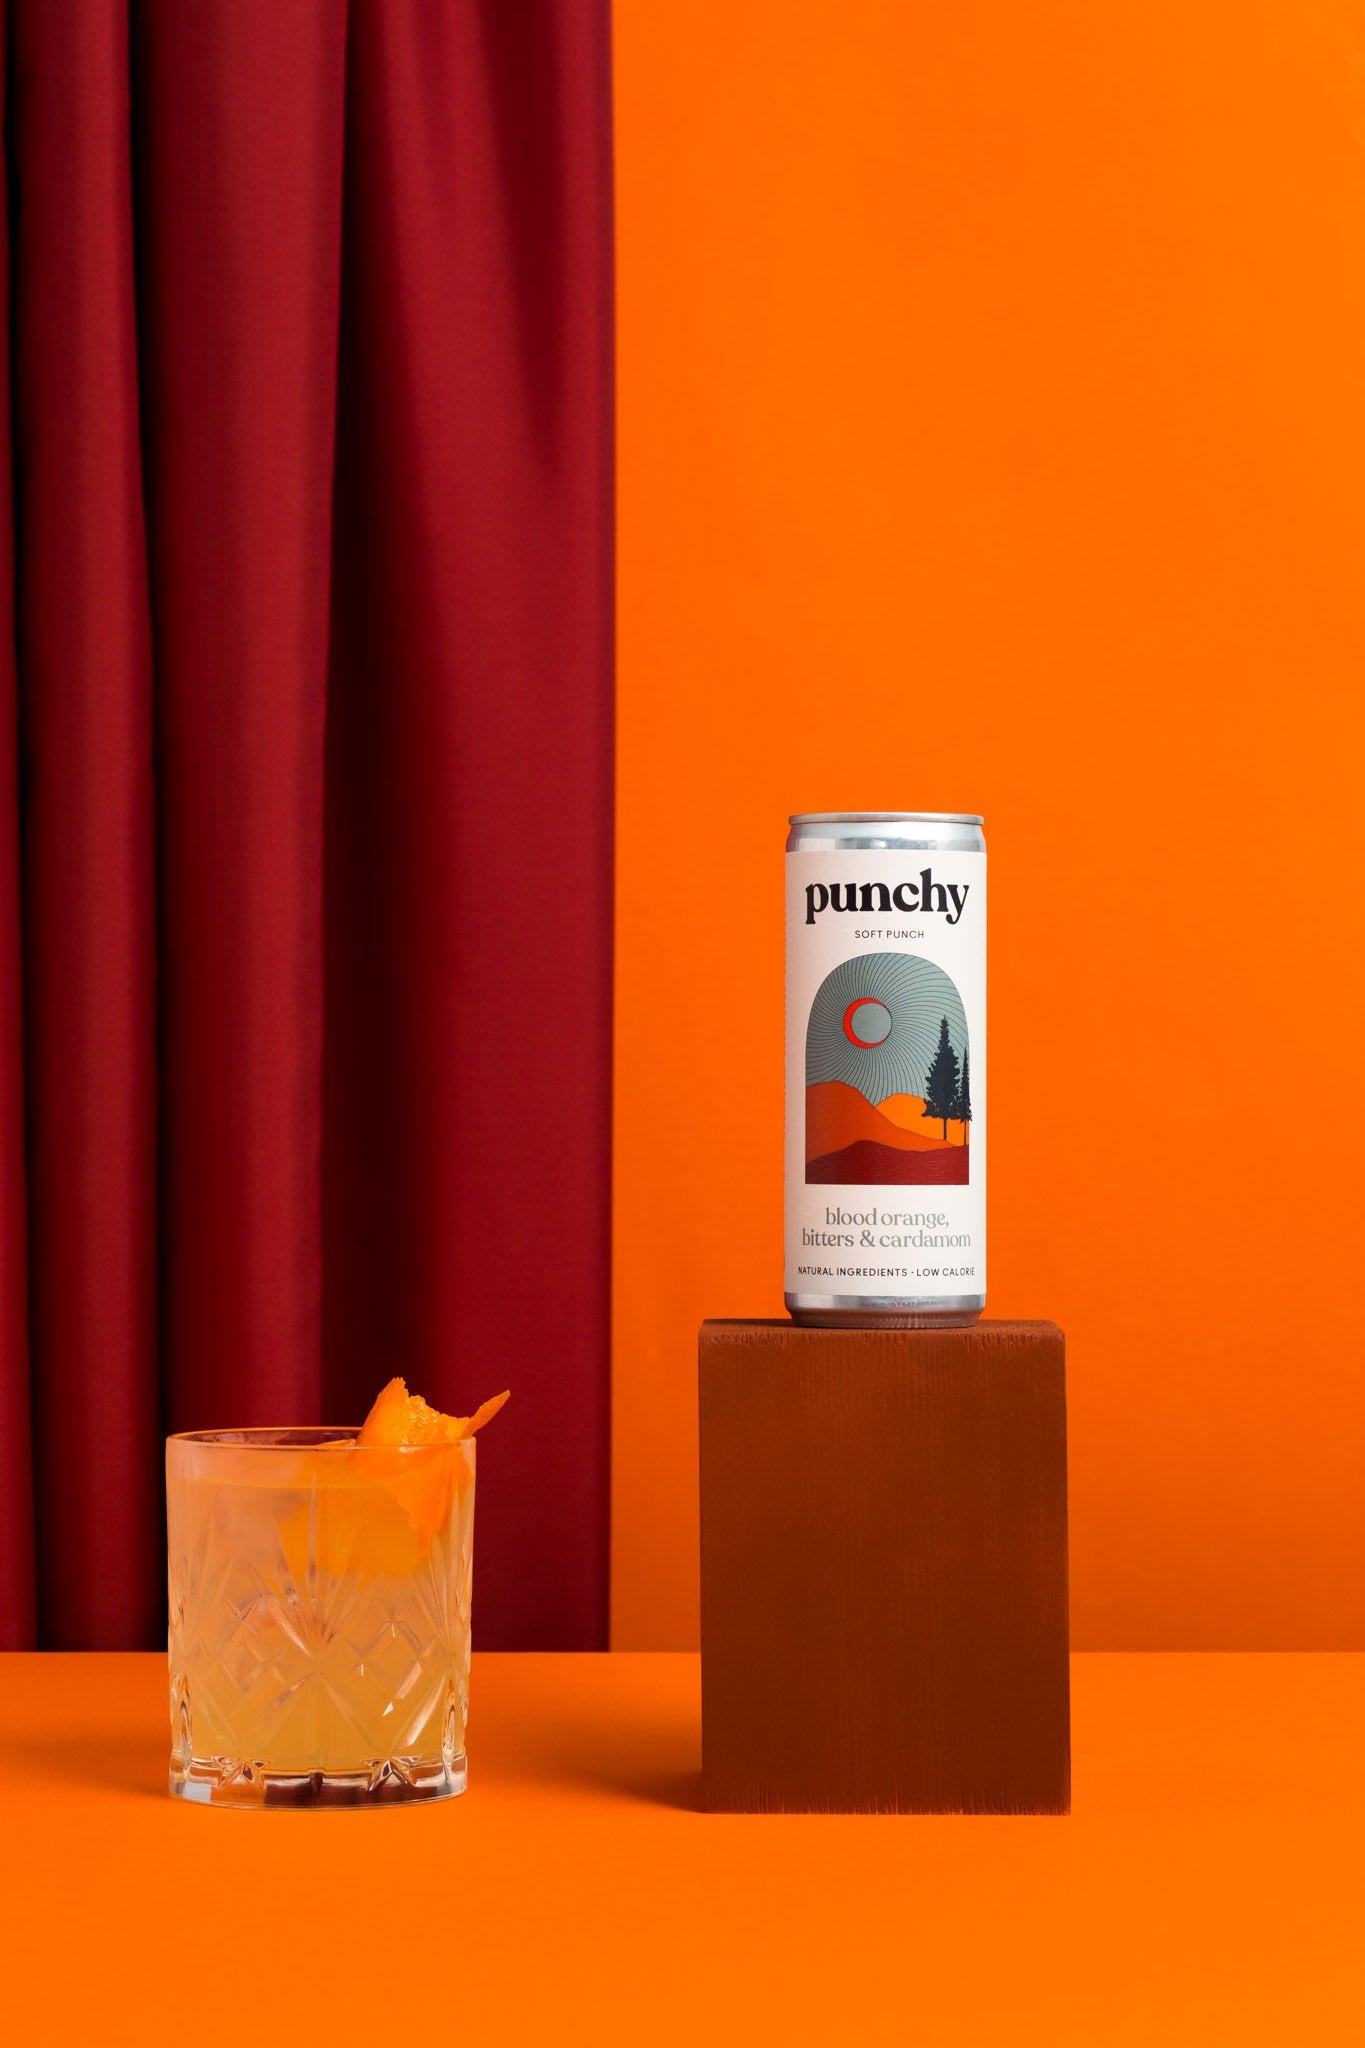 Punchy Drinks - Golden Hour: Blood Orange, Bitters & Cardamom // Stores Supply // Punchy